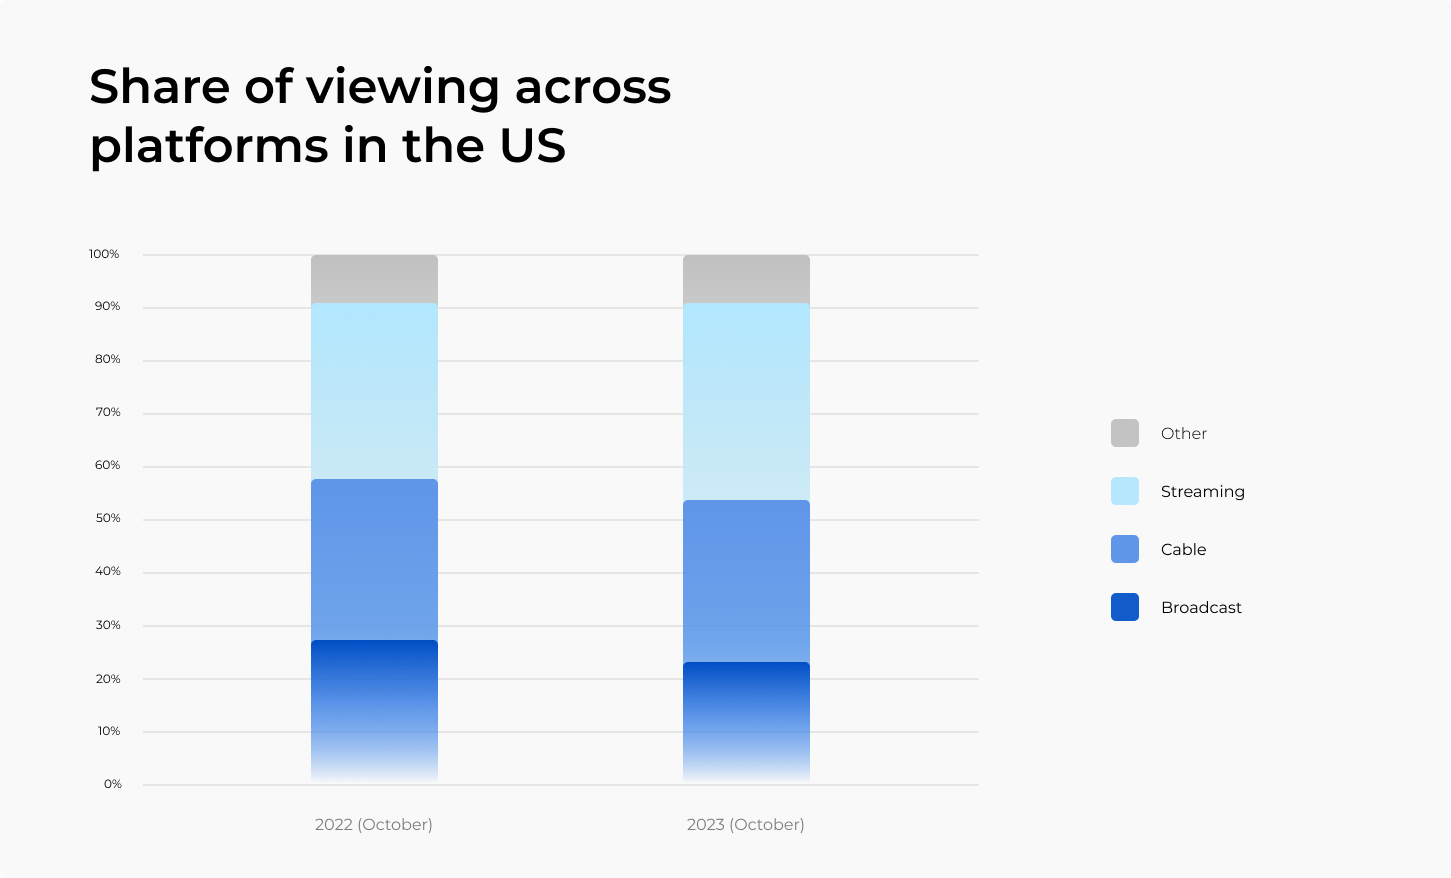 Share of viewing across platforms in the US